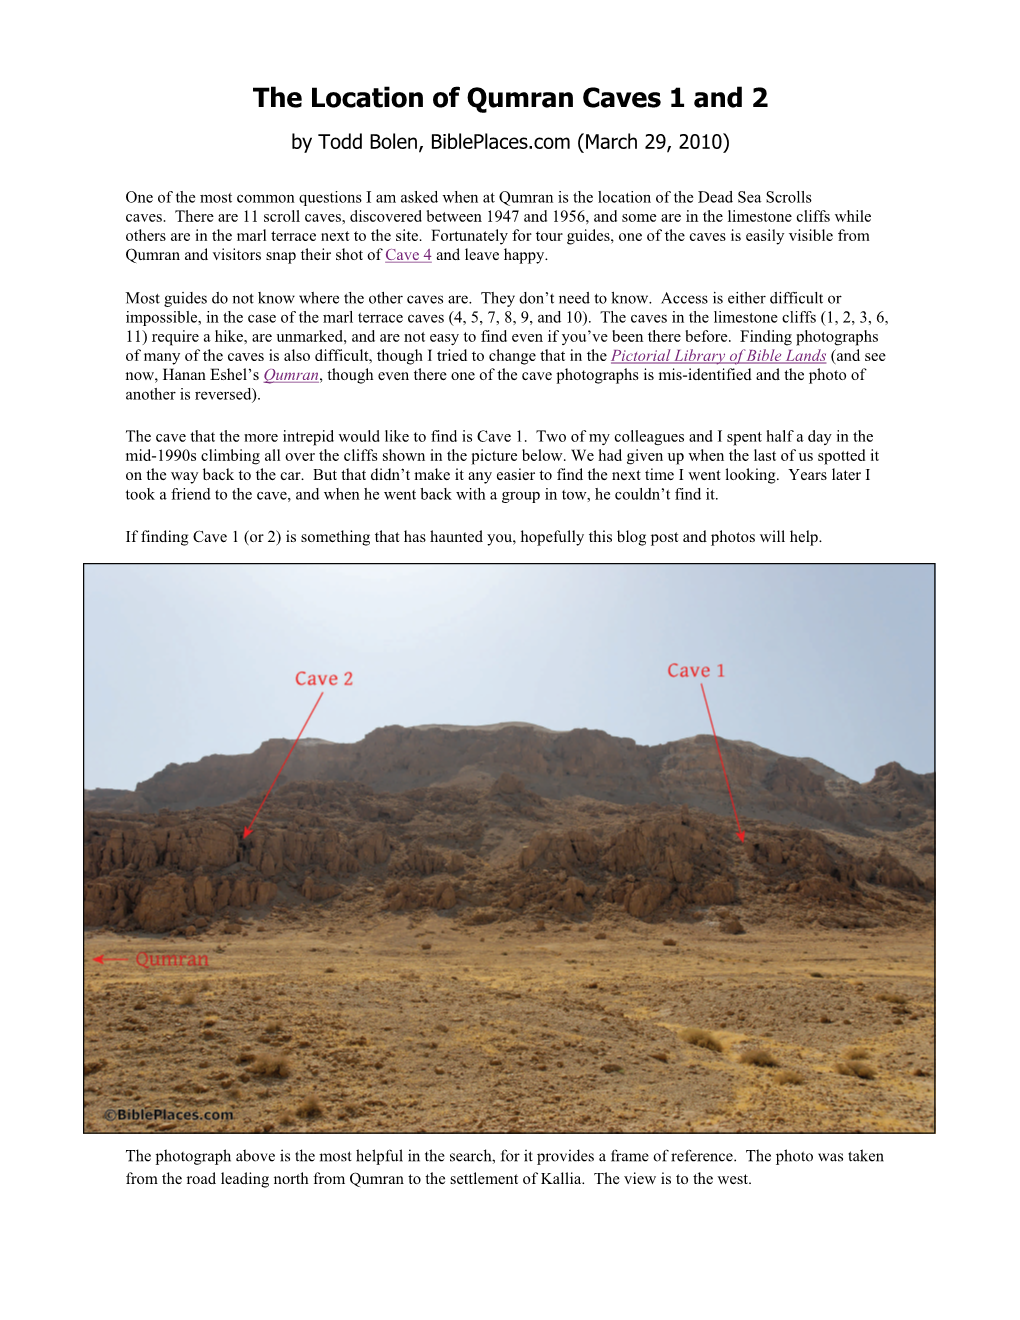 The Location of Qumran Caves 1 and 2